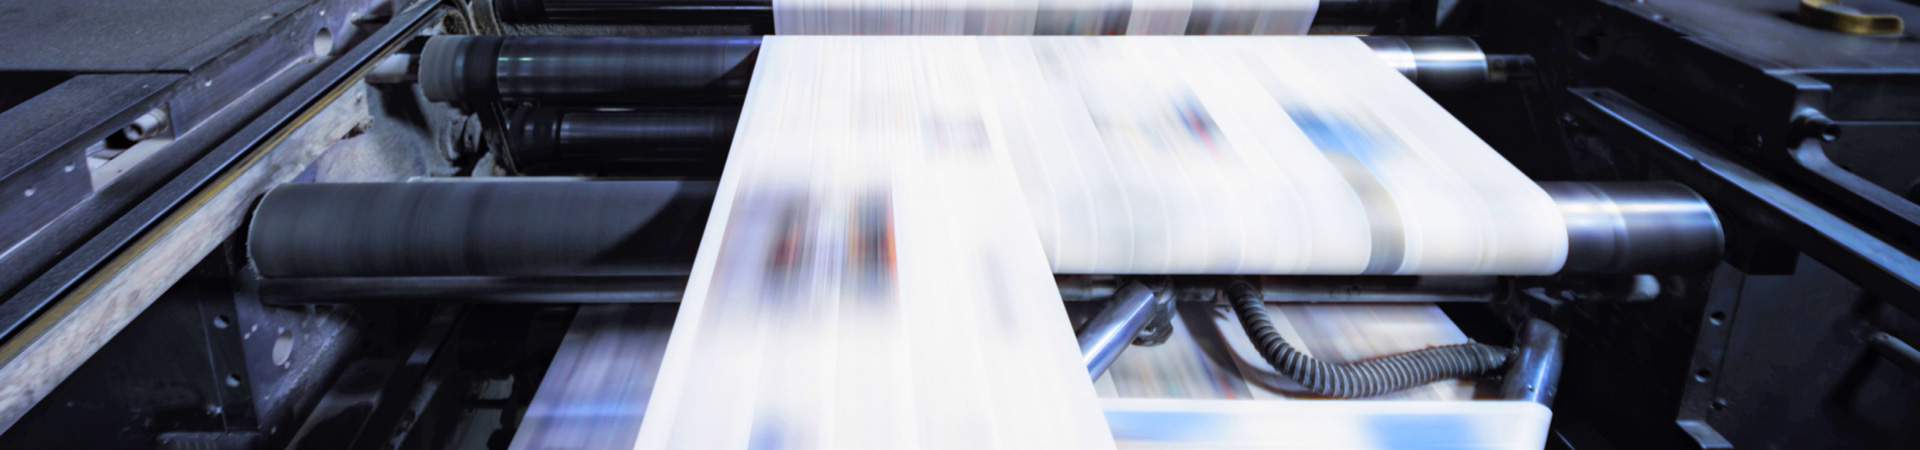  a printing press with pages running through quickly 